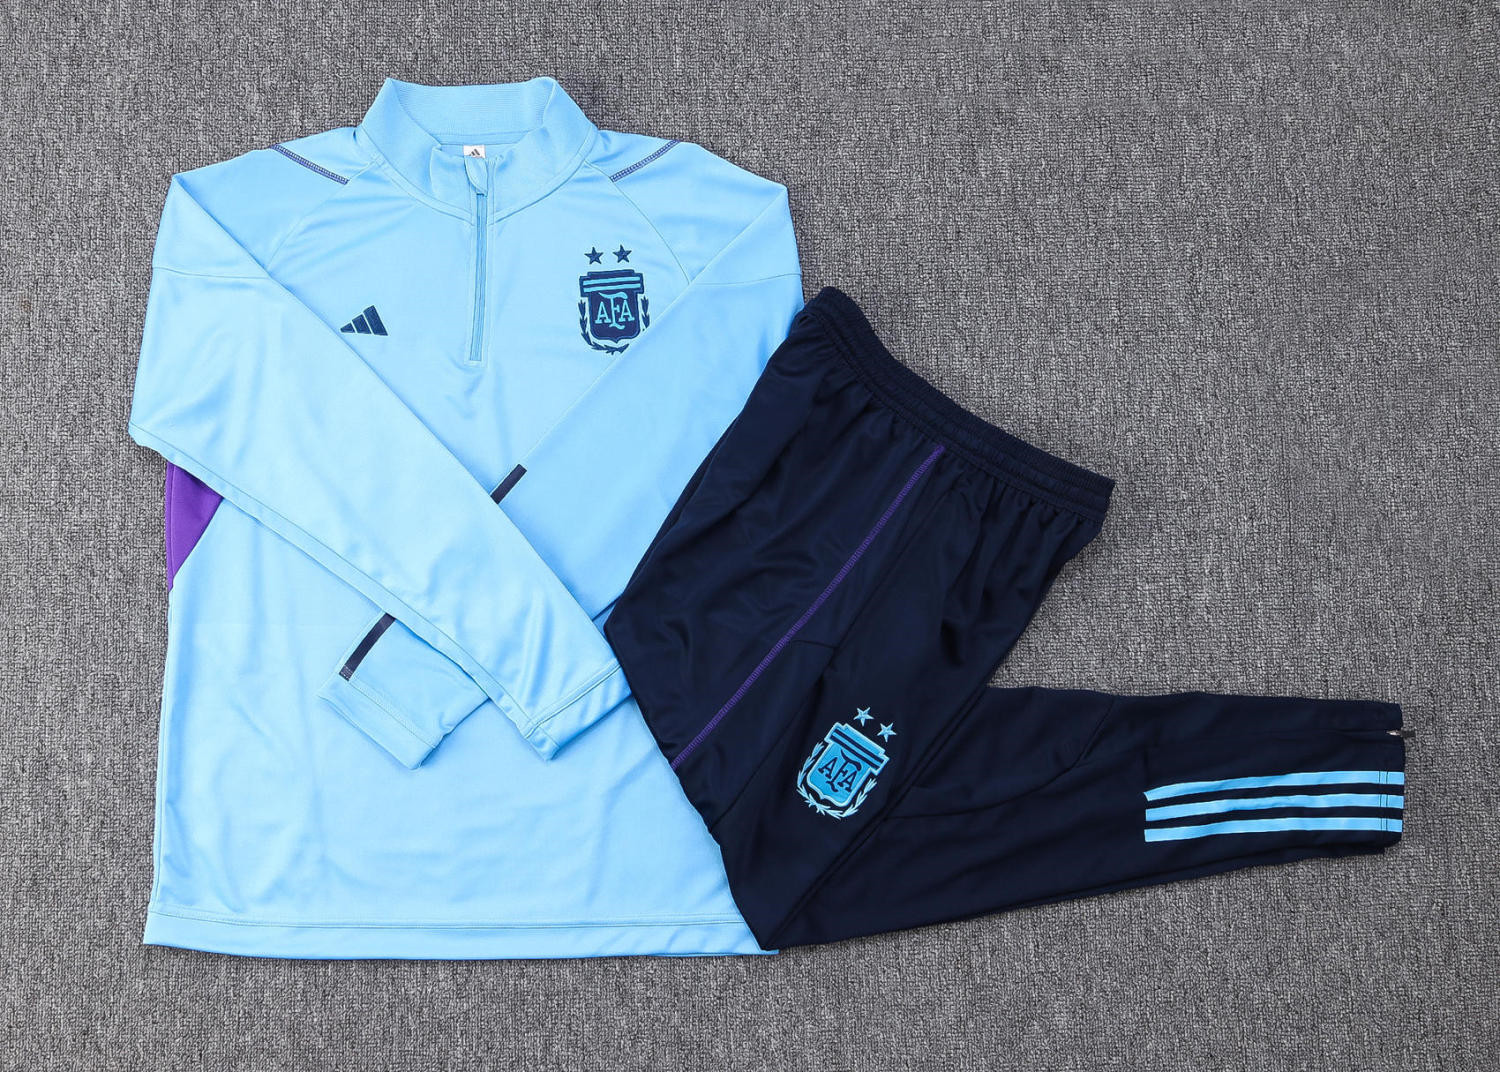 Argentina Soccer Training Suit Replica Blue 2022 Youth